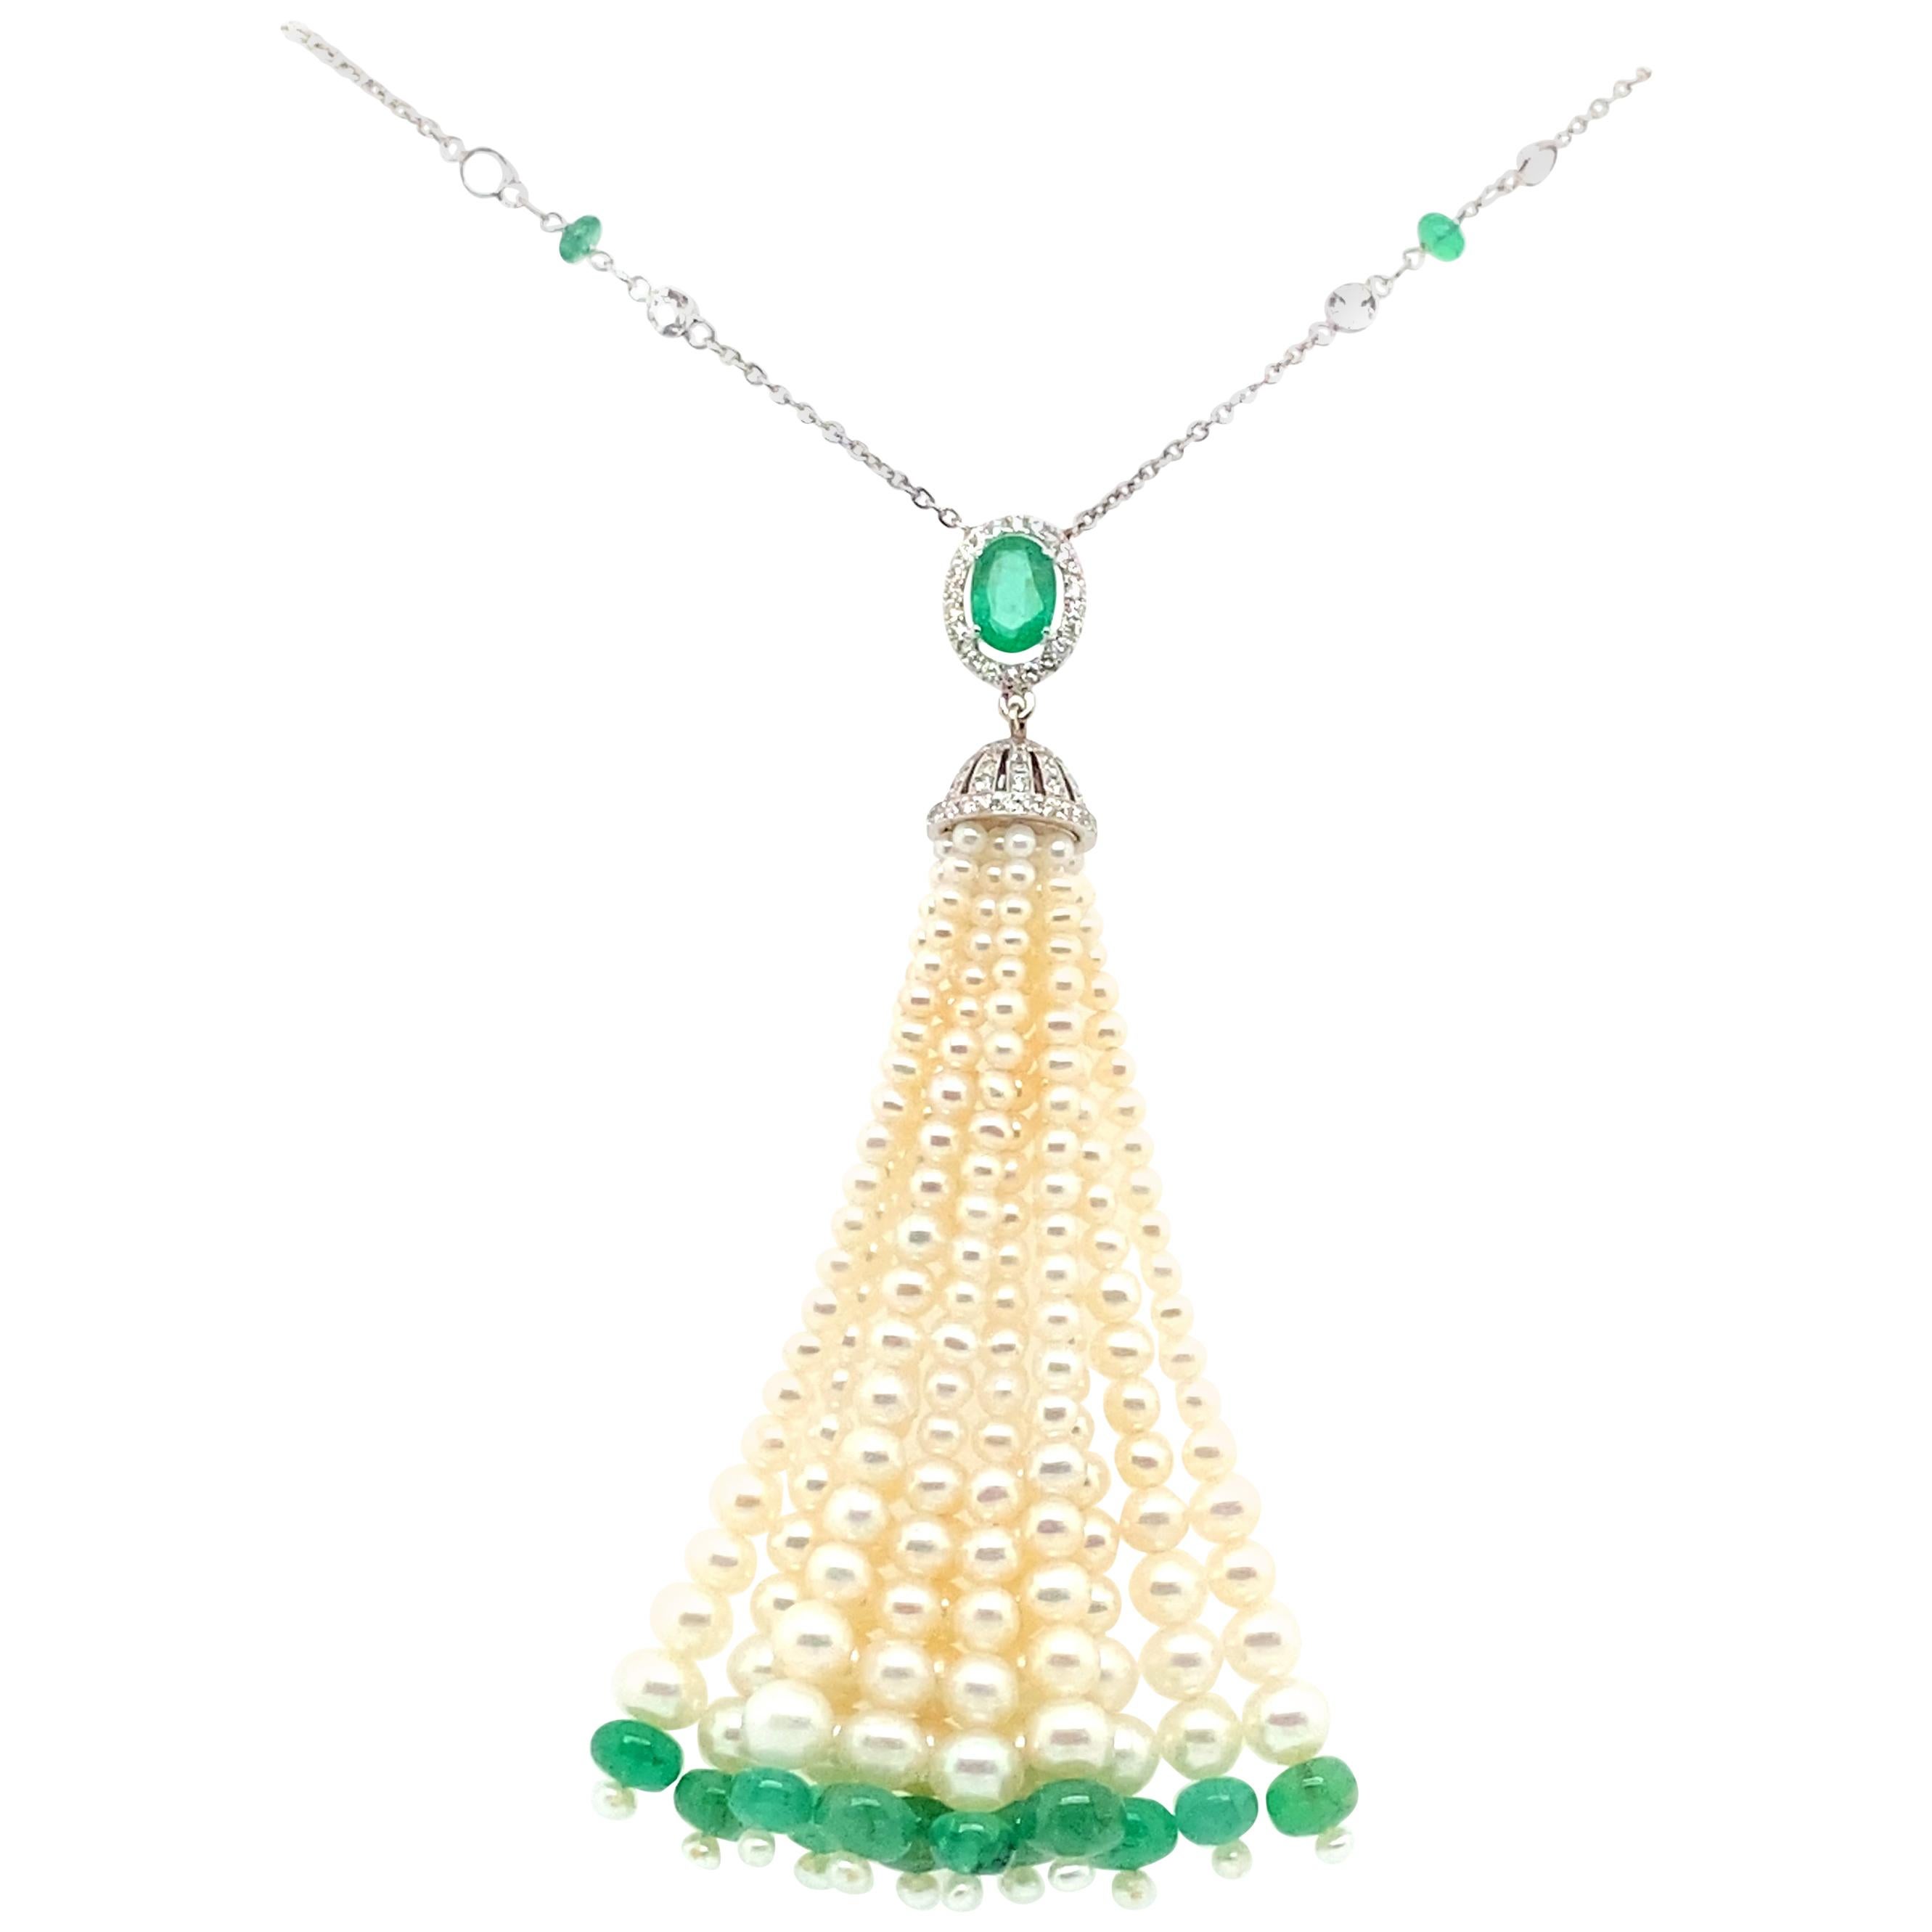 Oval-Cut Emerald, Emerald Beads, Pearls, and White Diamond Gold Tassel Necklace